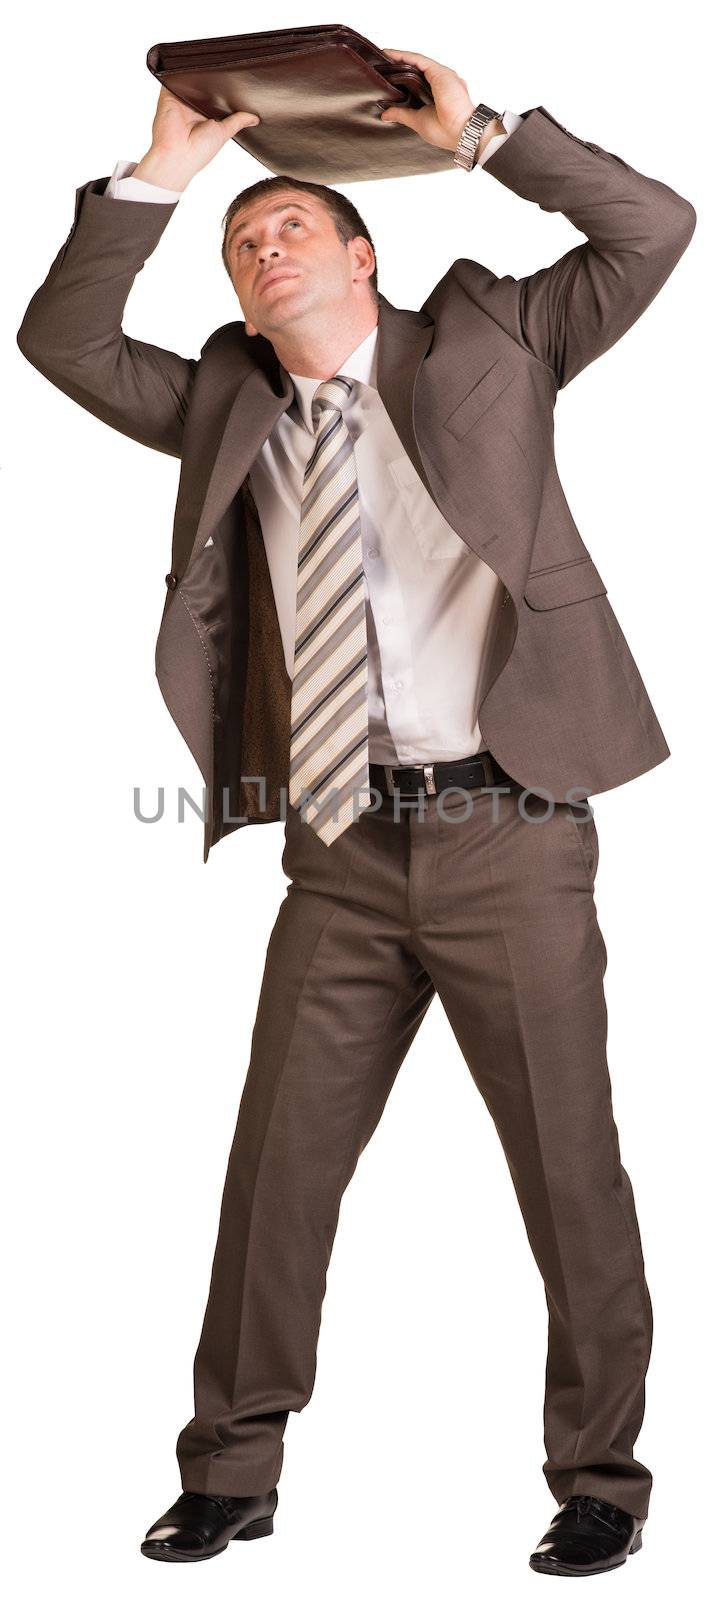 Scared businessman with briefcase by cherezoff